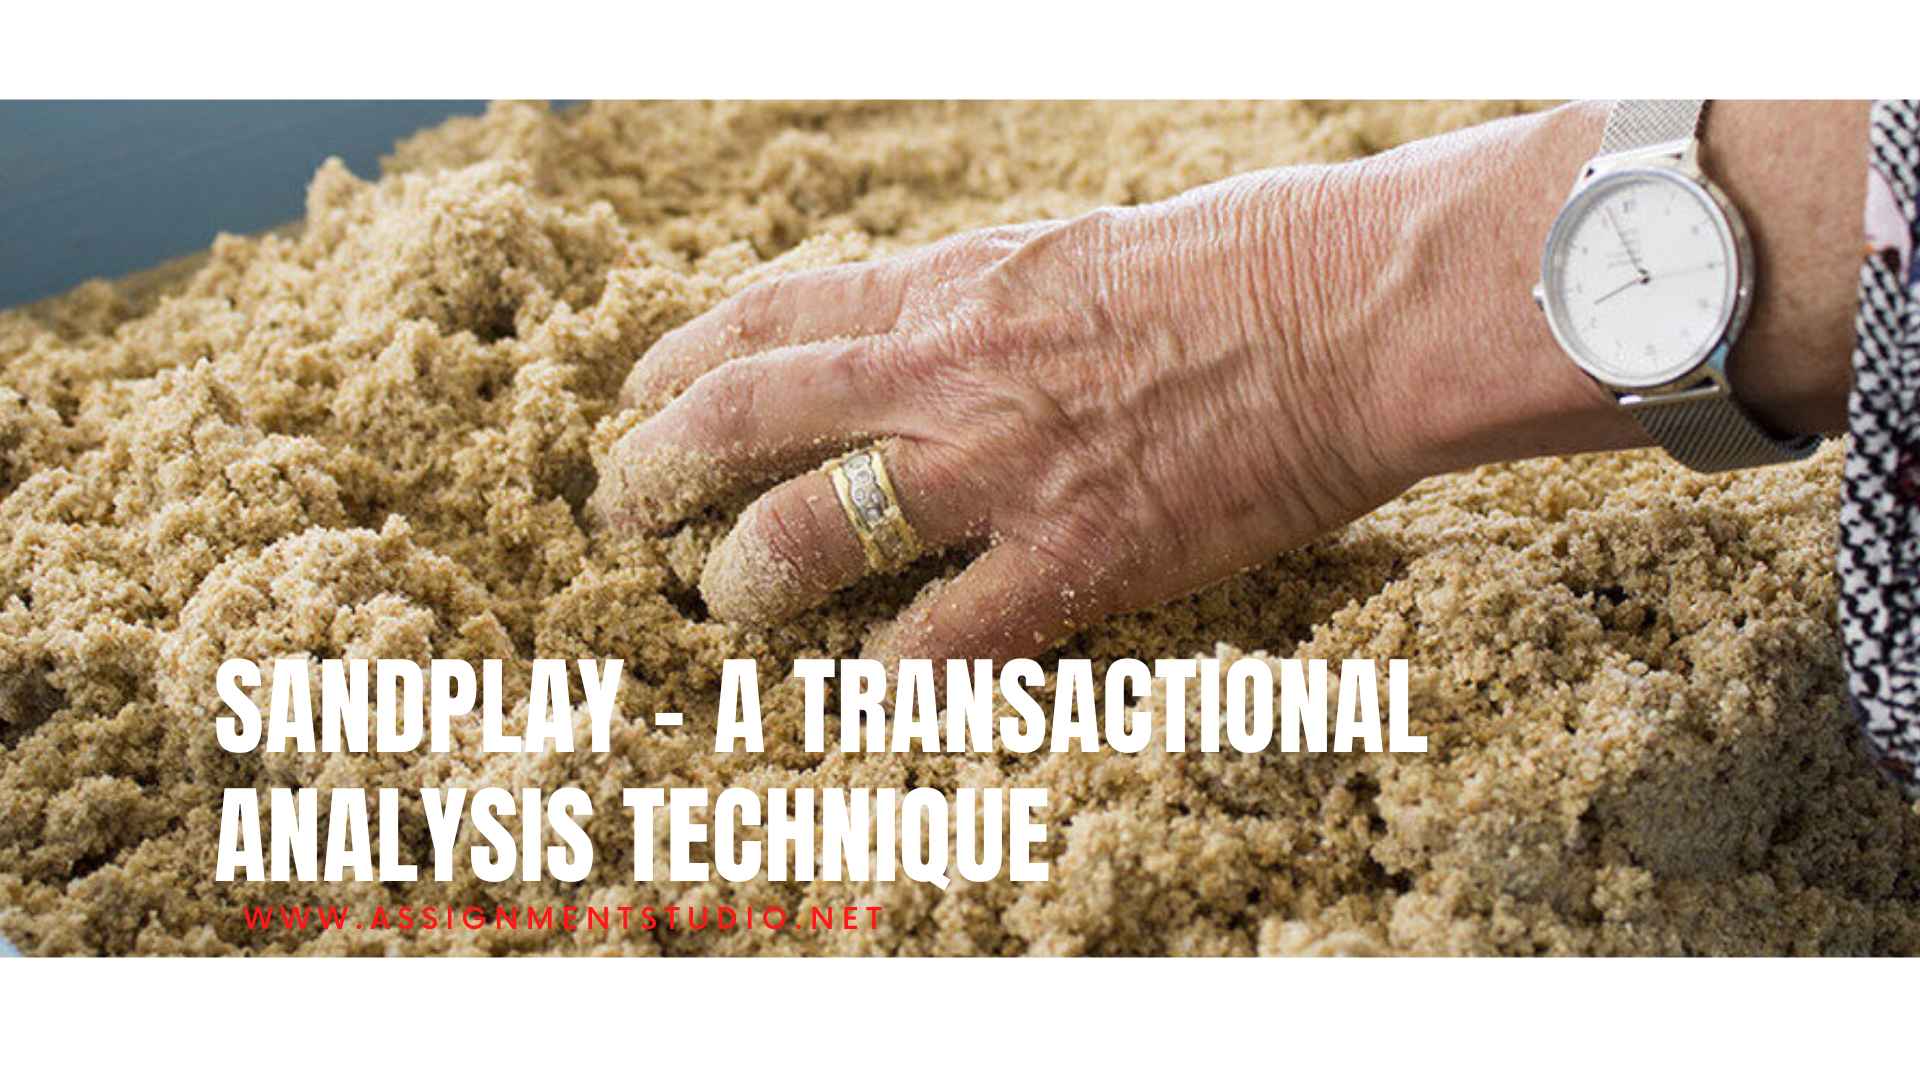 sandpaly a transactional analysis technique